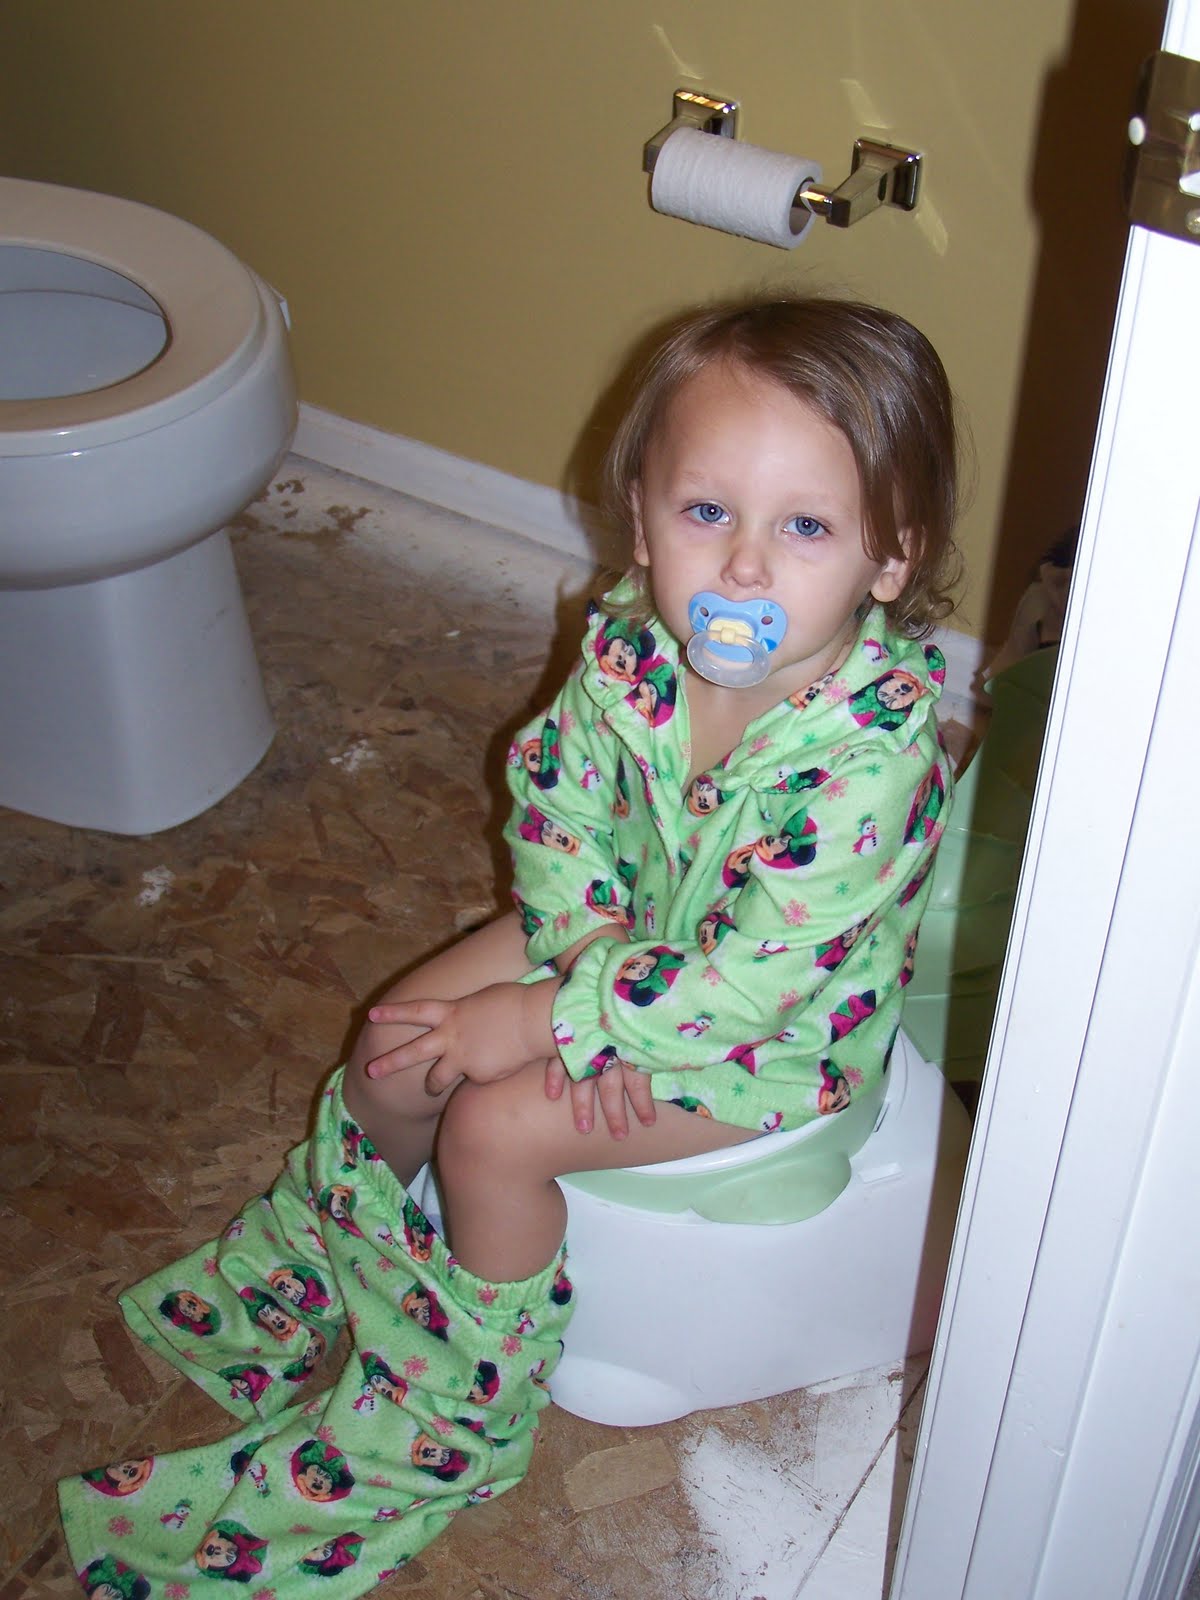 Party of 5: Potty Training